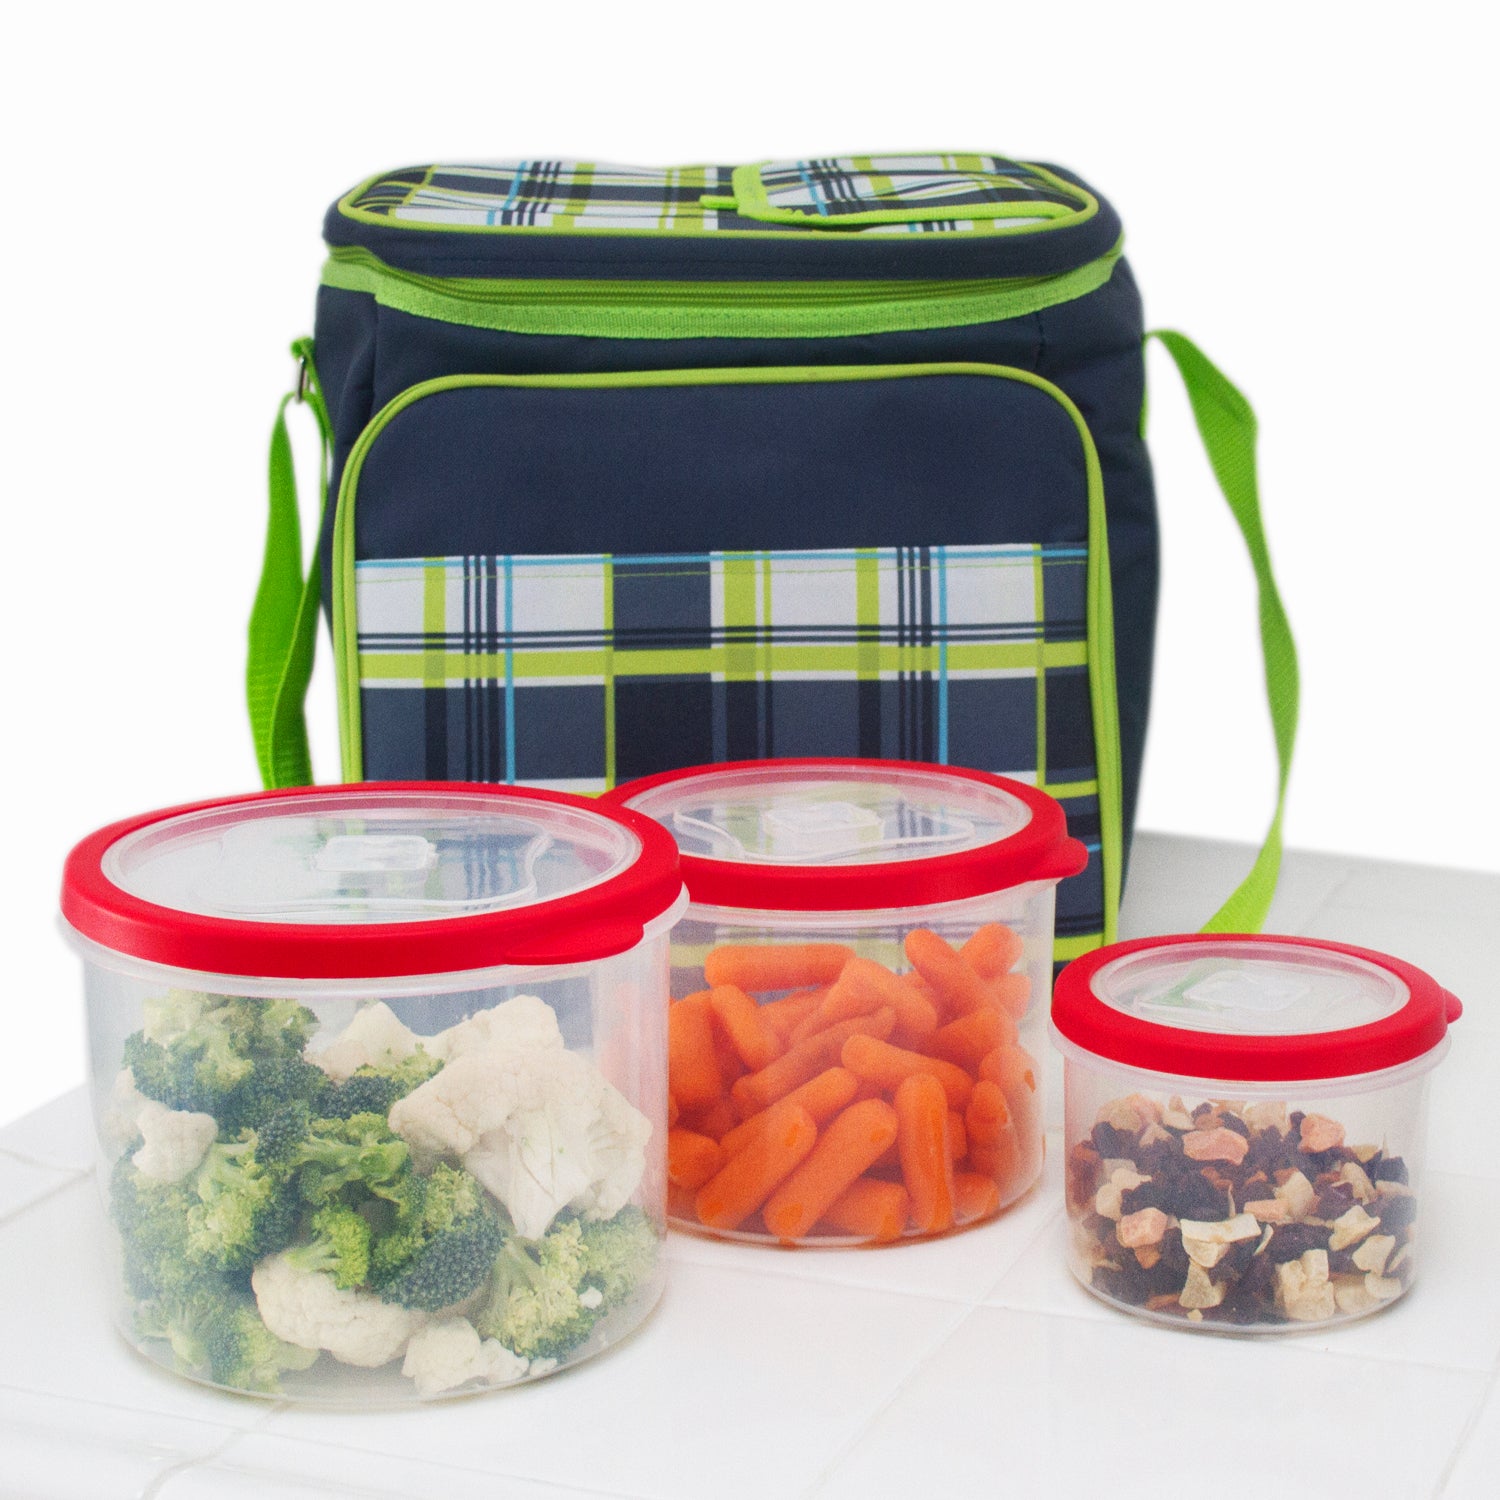 10 Pc Grade Food Storage Containers w/ Multi Color Lids - BPA Free Lunch Leftovers Refrigerator Containers (Round Red)